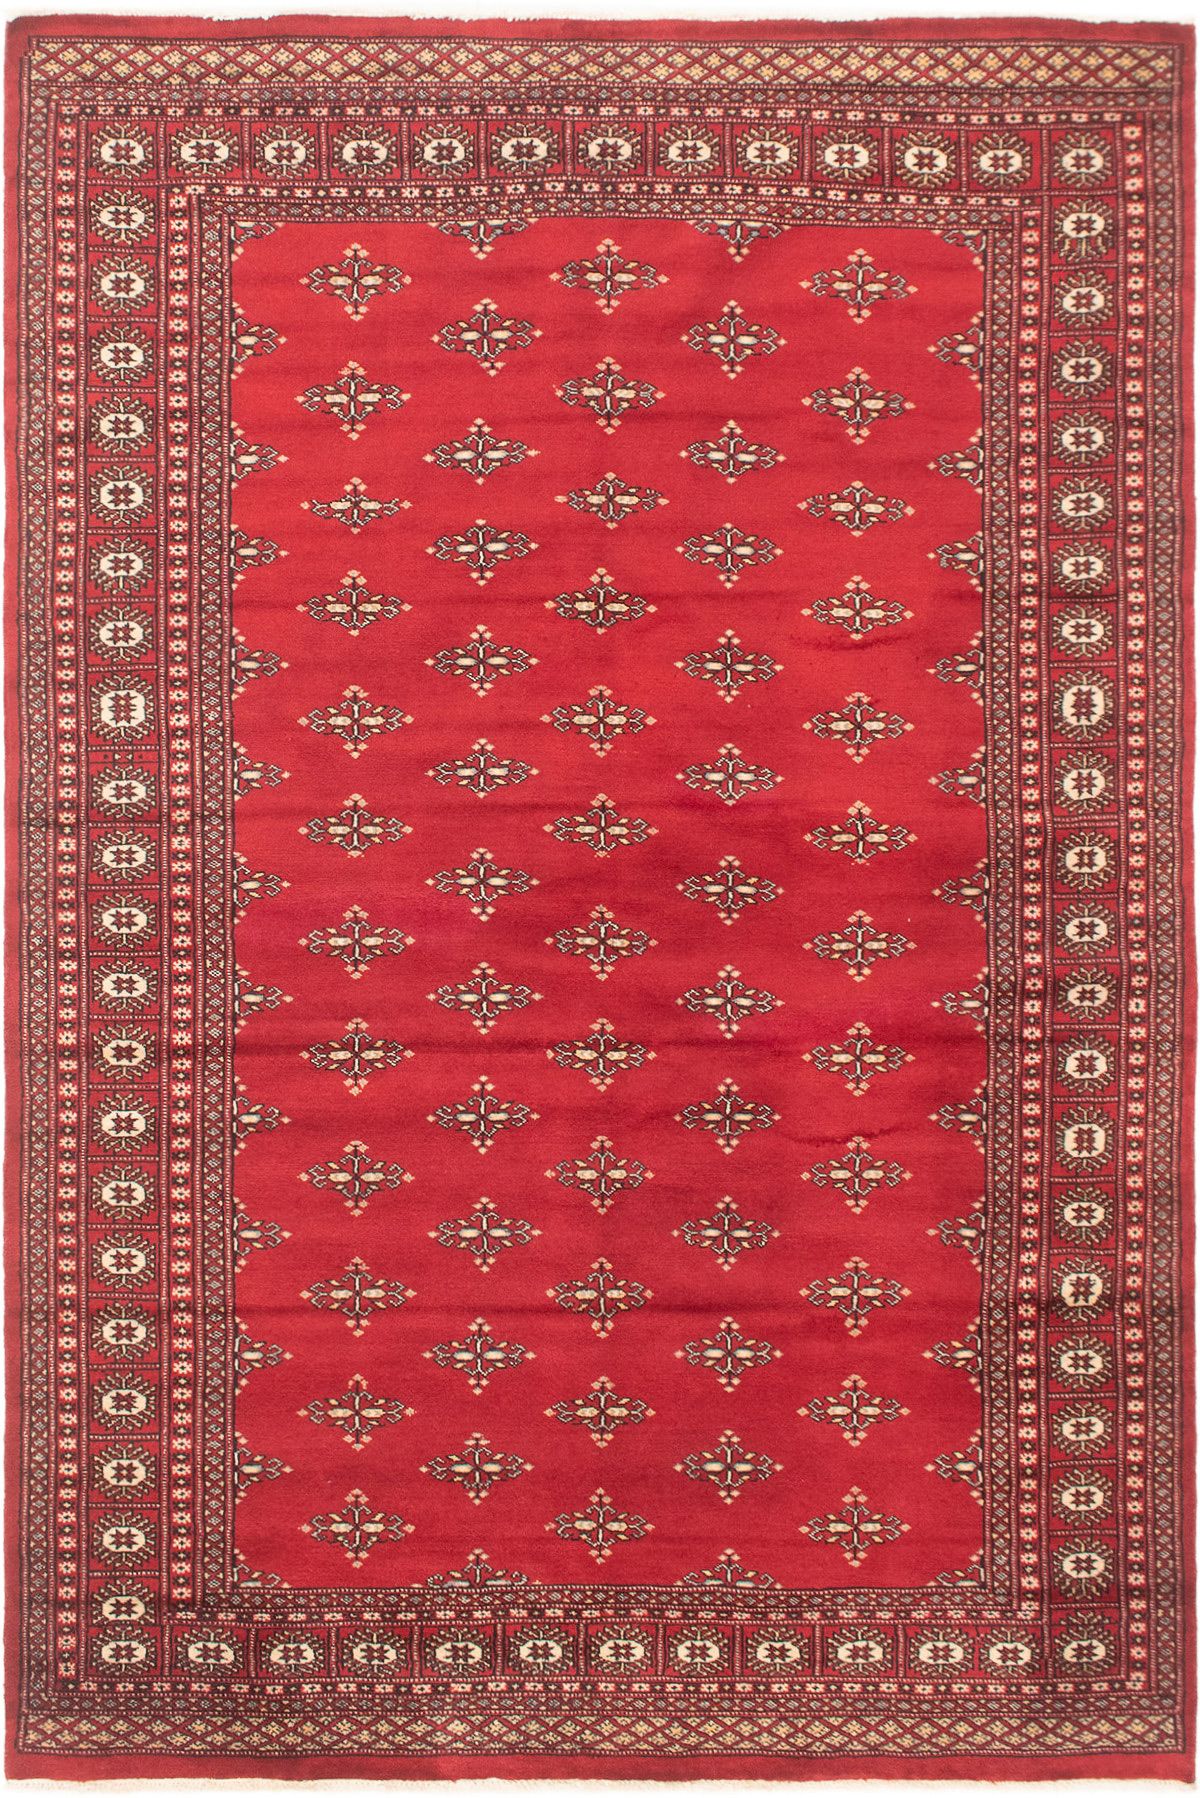 Hand-knotted Finest Peshawar Bokhara Red Wool Rug 5'11" x 8'11" Size: 5'11" x 8'11"  